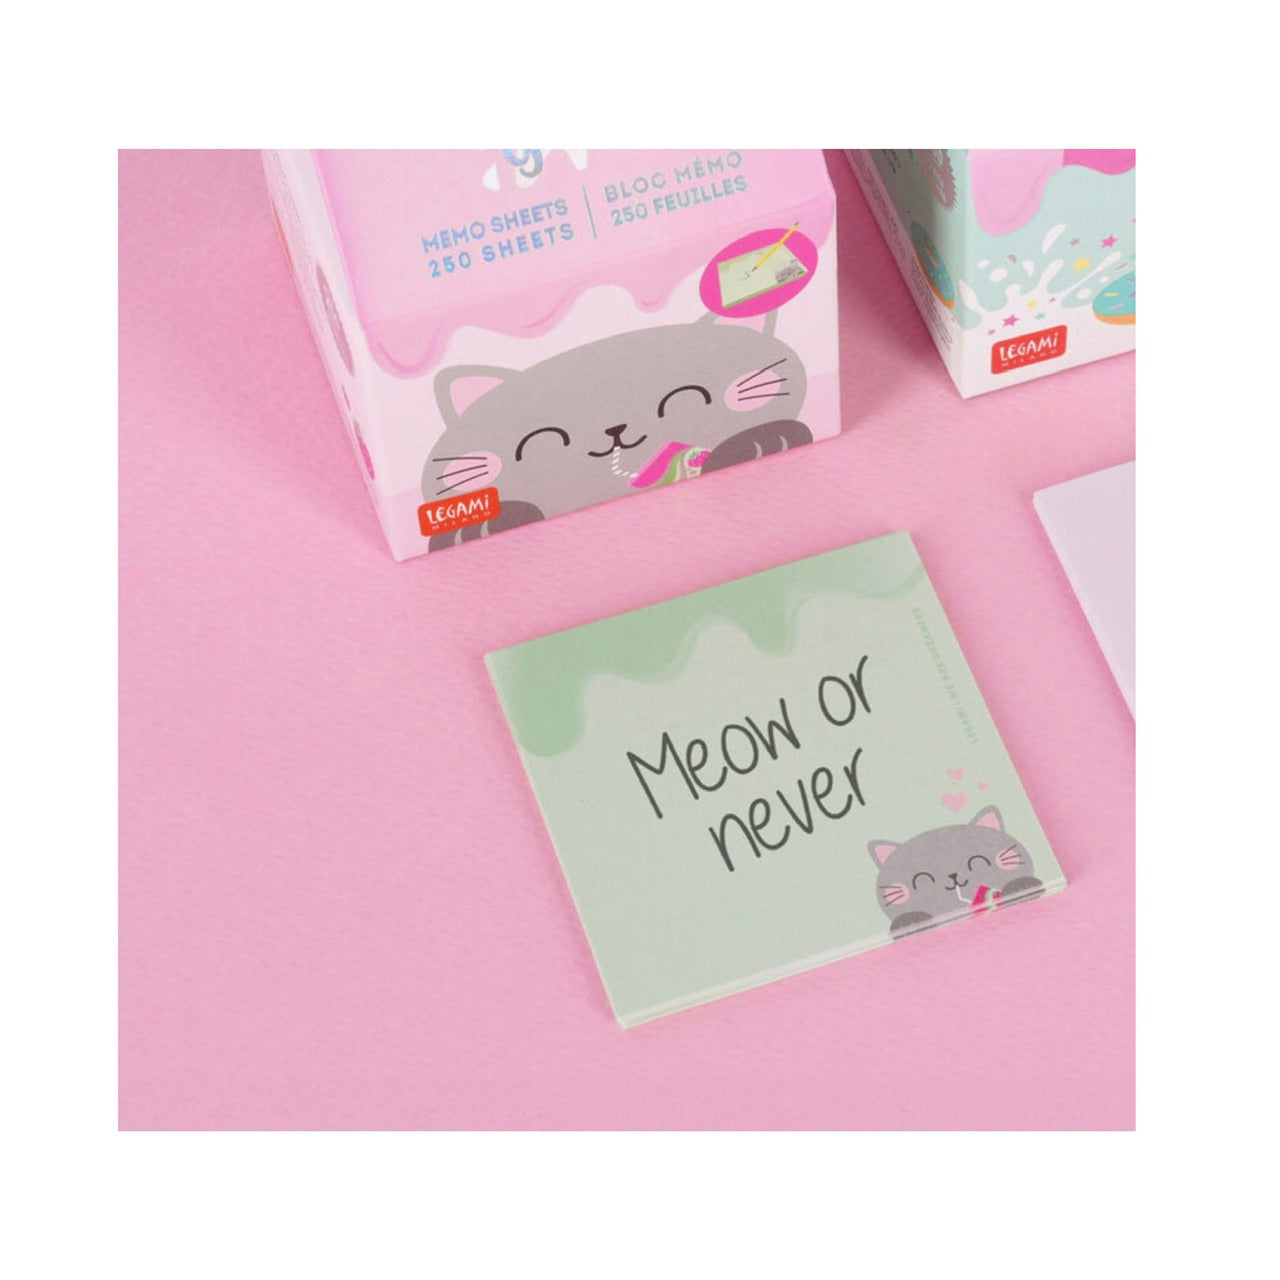 Some of the memo sheets laid out in front of the packaging. The memo sheet reads 'Meow or never’.